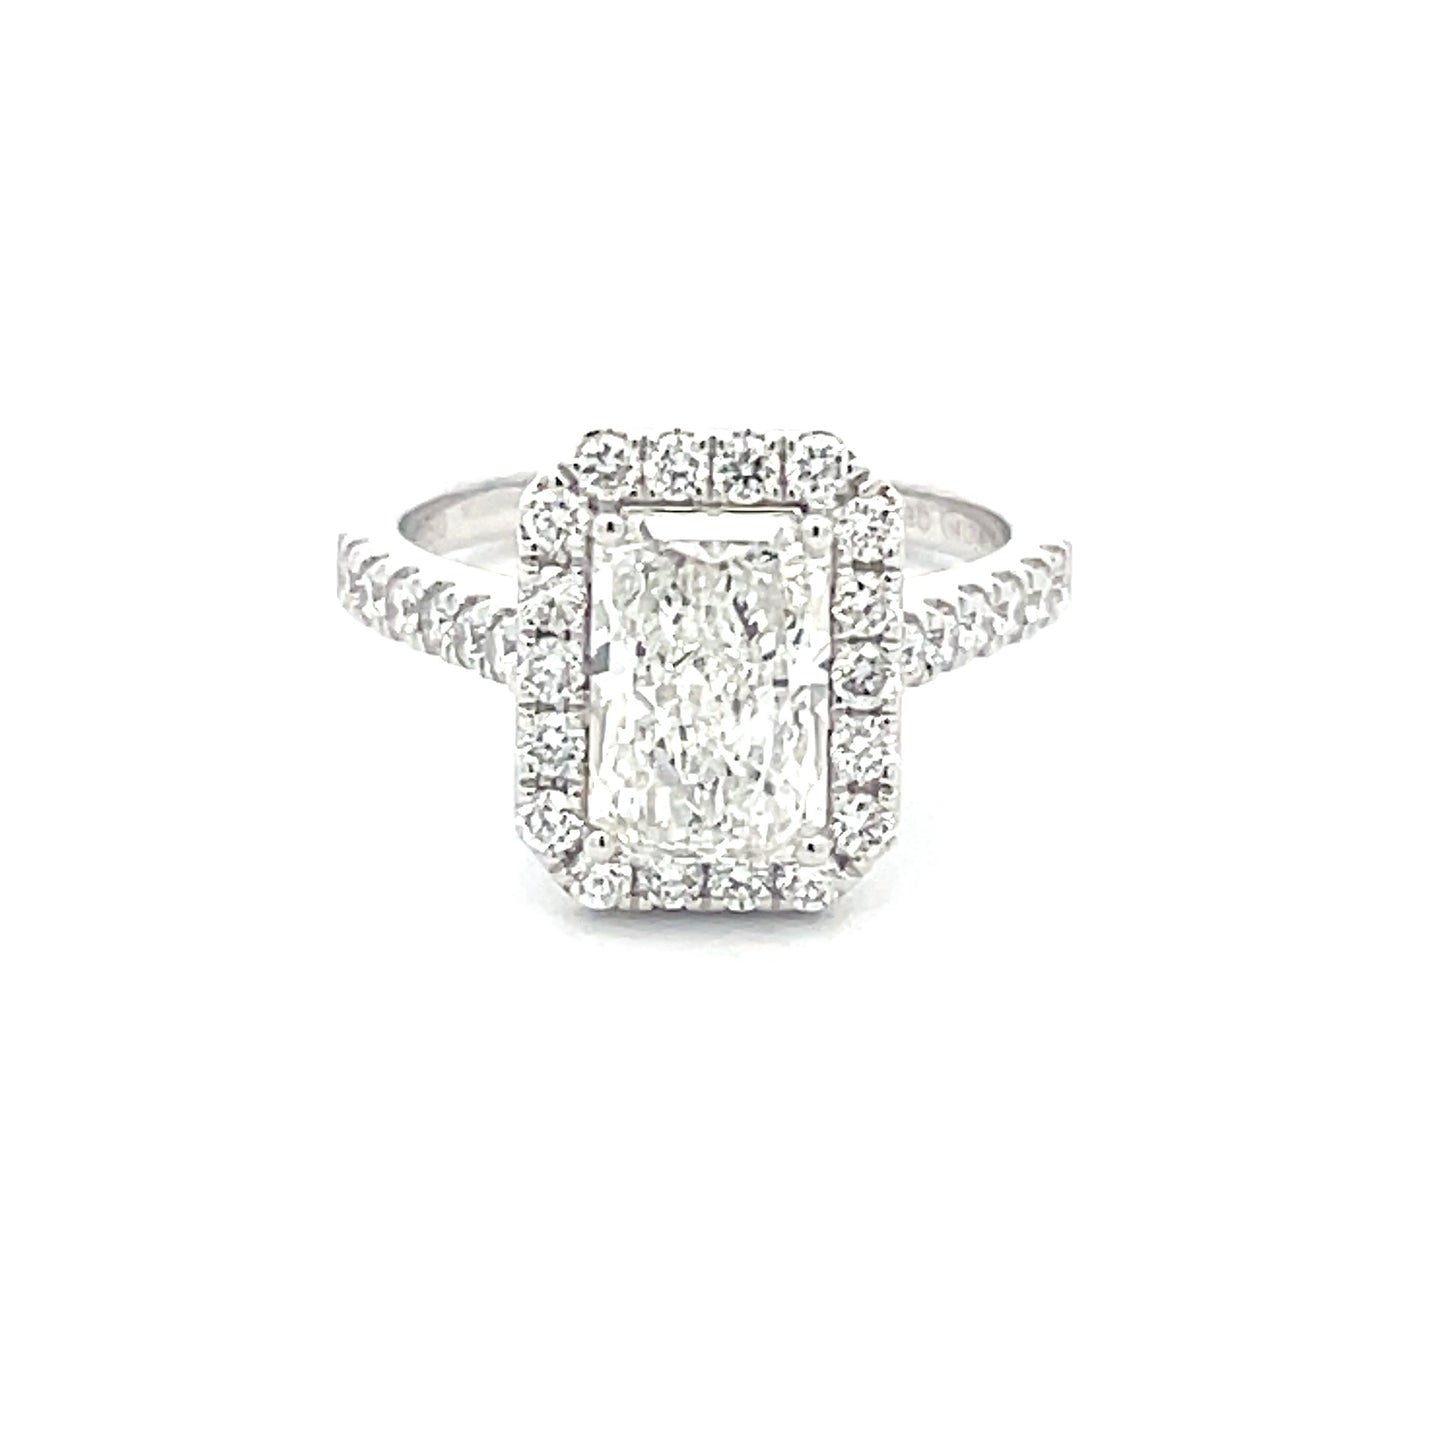 Lab grown radiant Cut Diamond Halo Style Ring - 2.29cts  Gardiner Brothers   